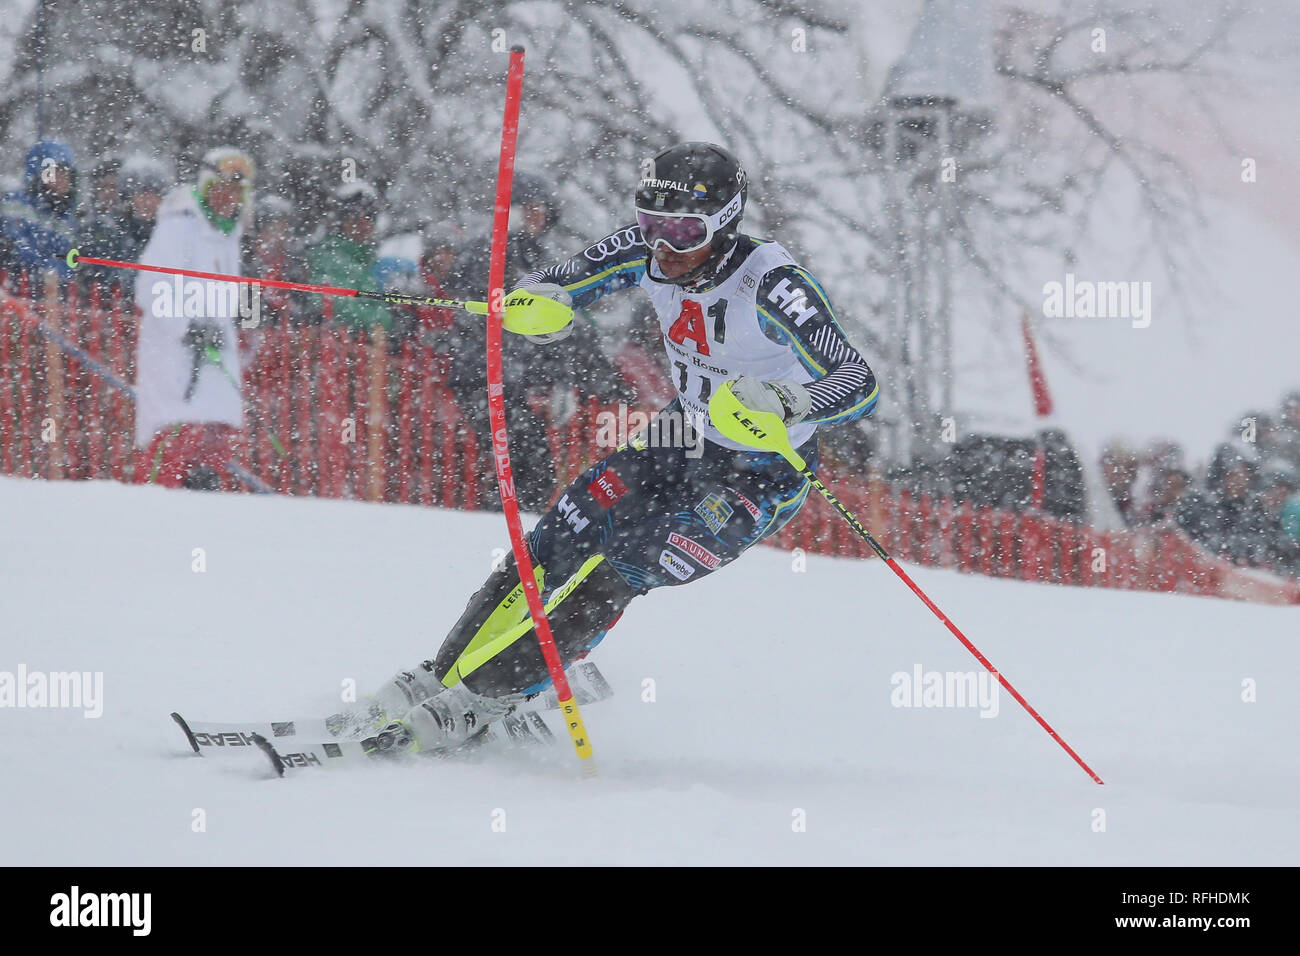 Kitzbuehel, Austria. 26th Jan, 2019. Audi FIS Ski World Cup, Men's Slalom;  Andre Myhrer (SWE) in action clearing a gate Credit: Action Plus  Sports/Alamy Live News Stock Photo - Alamy